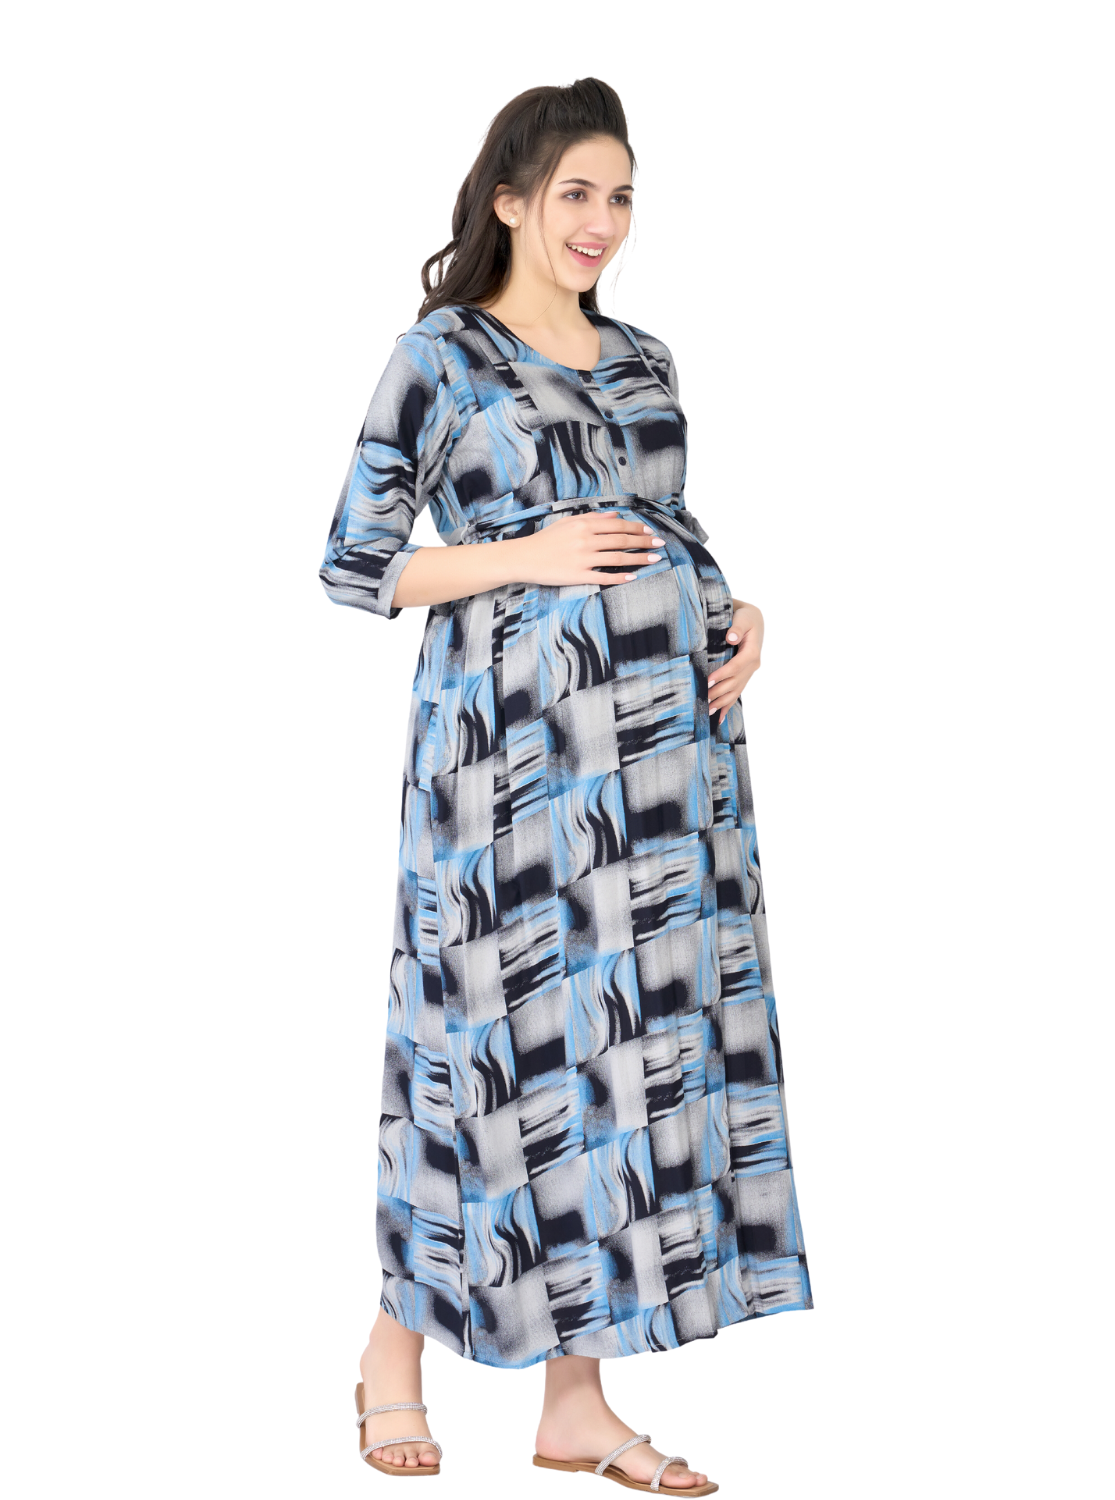 ONLY MINE Premium MAXI Mom's Wear - Soft & Smooth Rayon | Maternity | Feeding | Maxi Model | Casual Wear for Pregnancy Women's